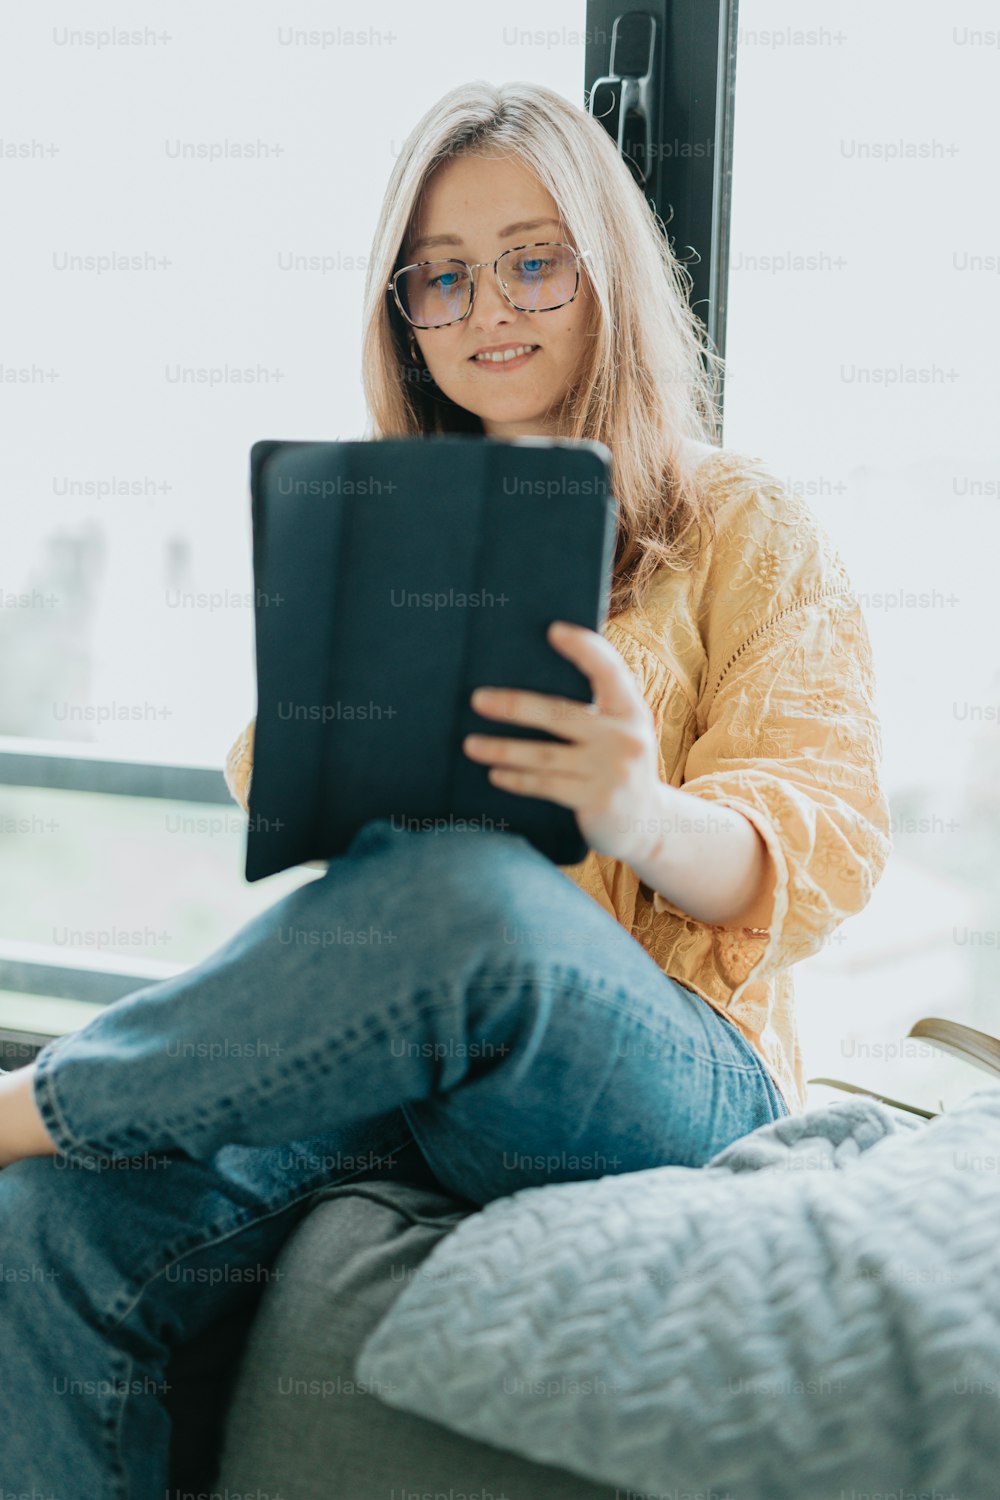 a woman sitting on a couch looking at a tablet